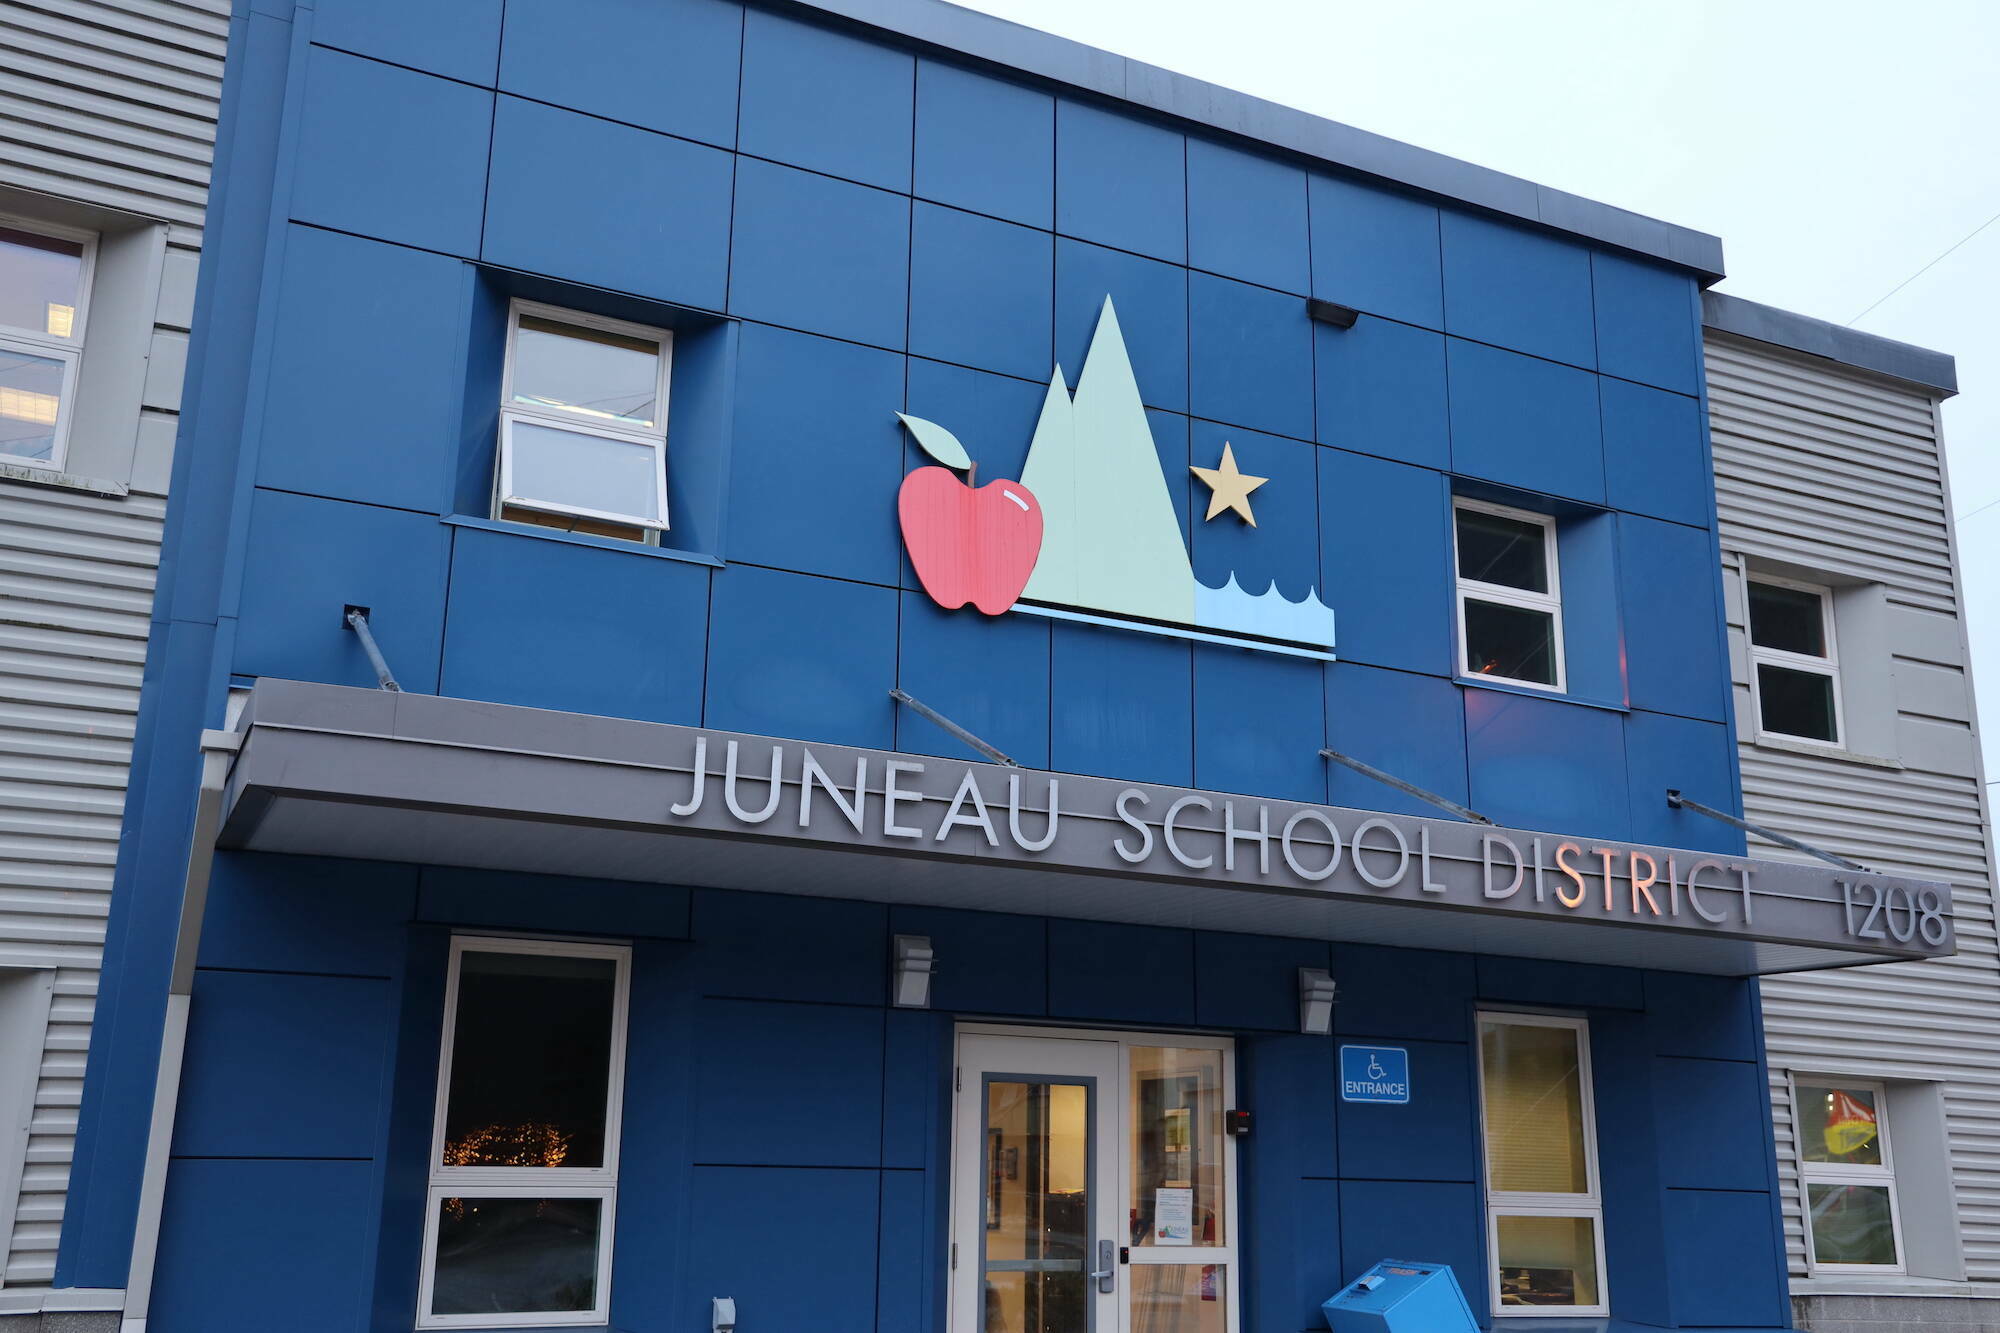 Leaders at the Juneau School District learned during the past week the district is facing a $9.5 million deficit during the current fiscal year that ends June 30. (Clarise Larson / Juneau Empire file photo)